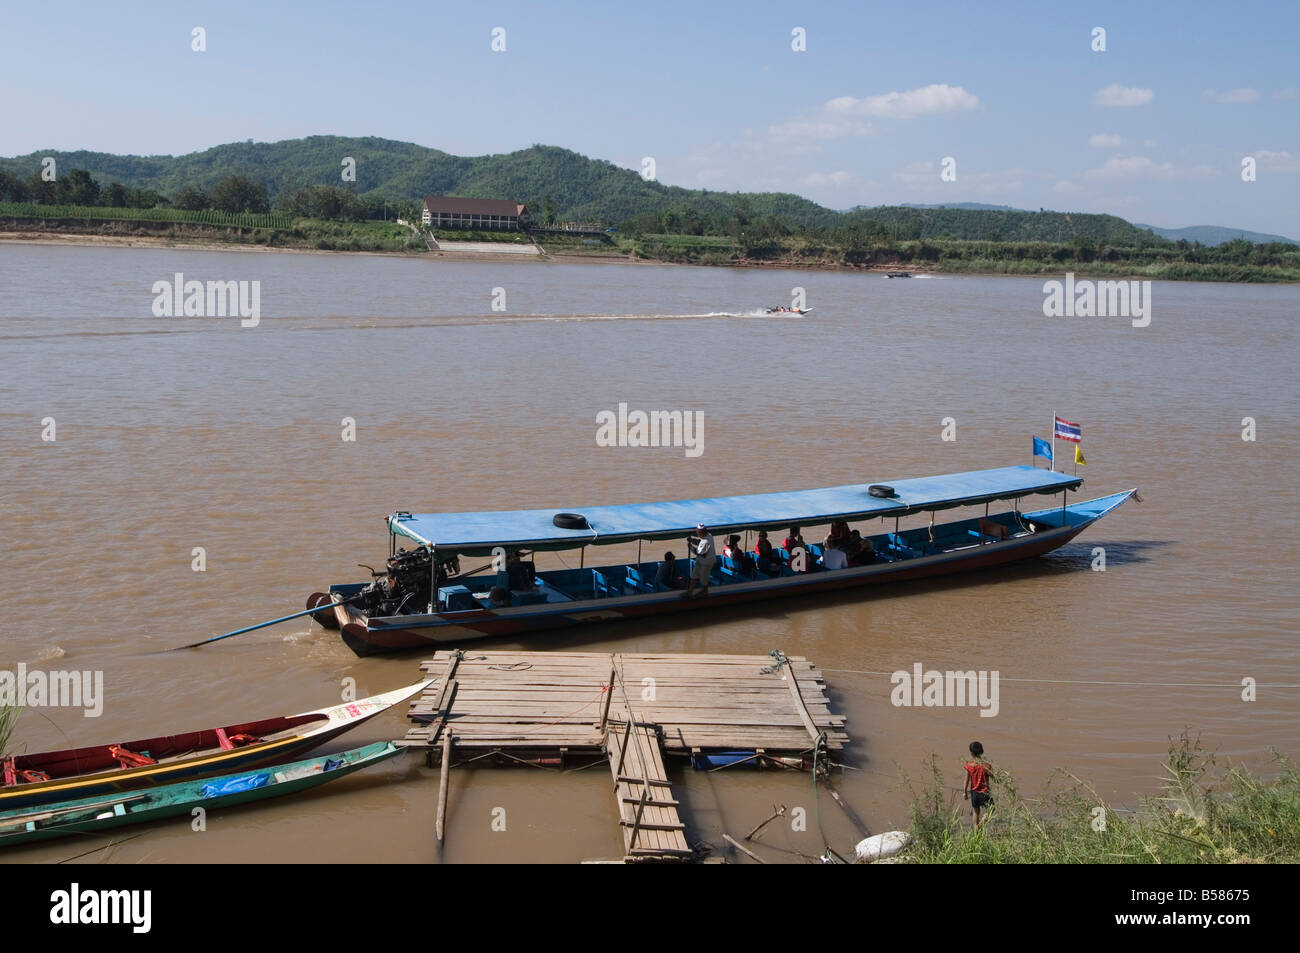 Boat on Mekong River, taken from Laos to Thailand on the opposite bank, Laos, Indochina, Southeast Asia, Asia Stock Photo